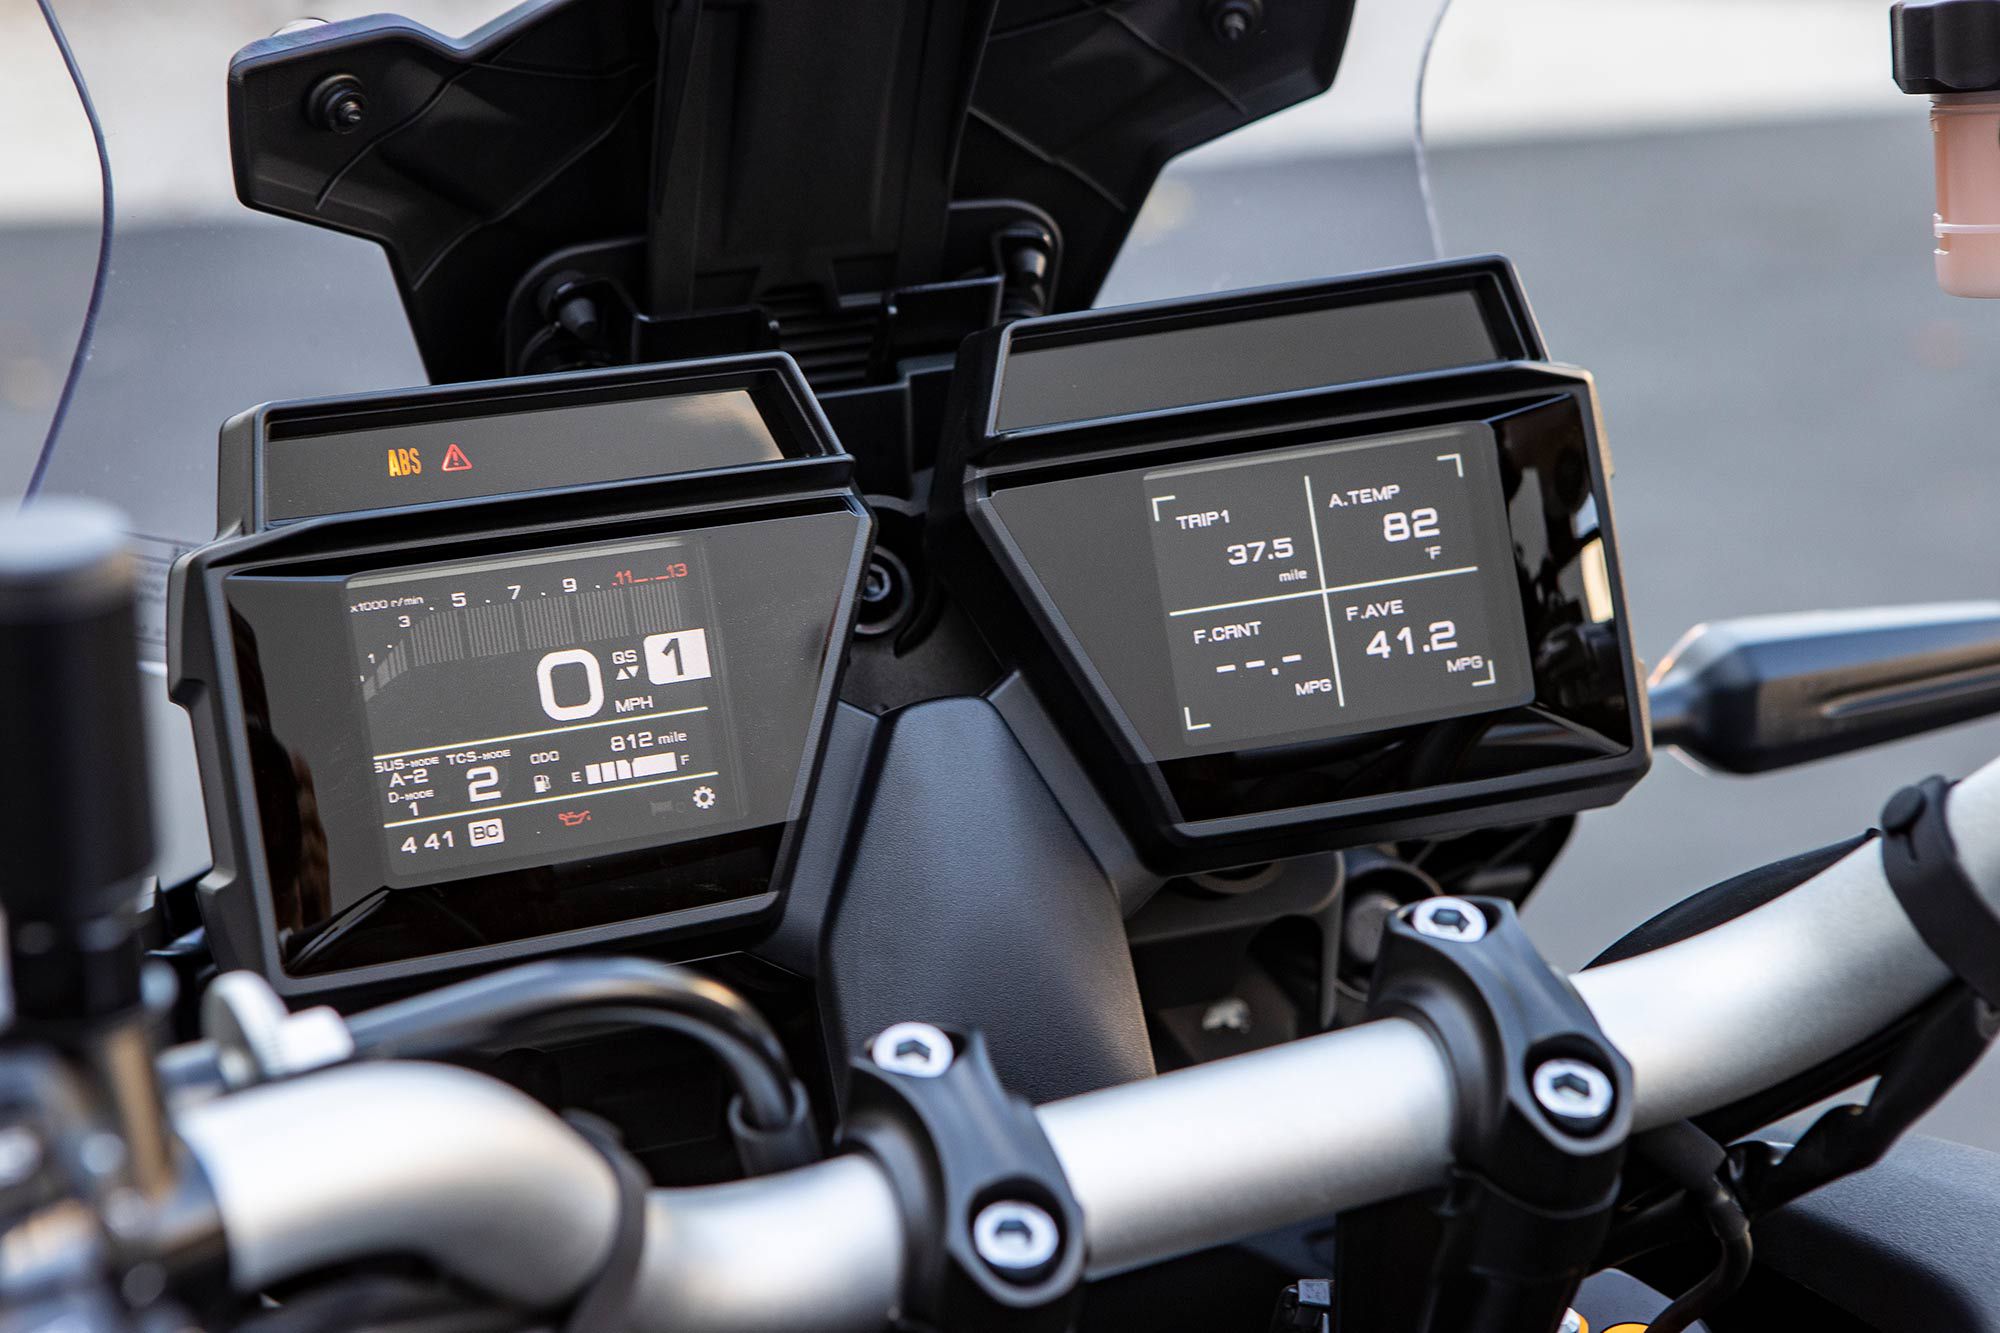 Unique to the Tracer 9 GT is this sweet dual 3.5-inch TFT display setup. The left display is home to the tachometer, speedometer, and gear indicator, while the right features four customizable quadrants to display additional information you may feel important.